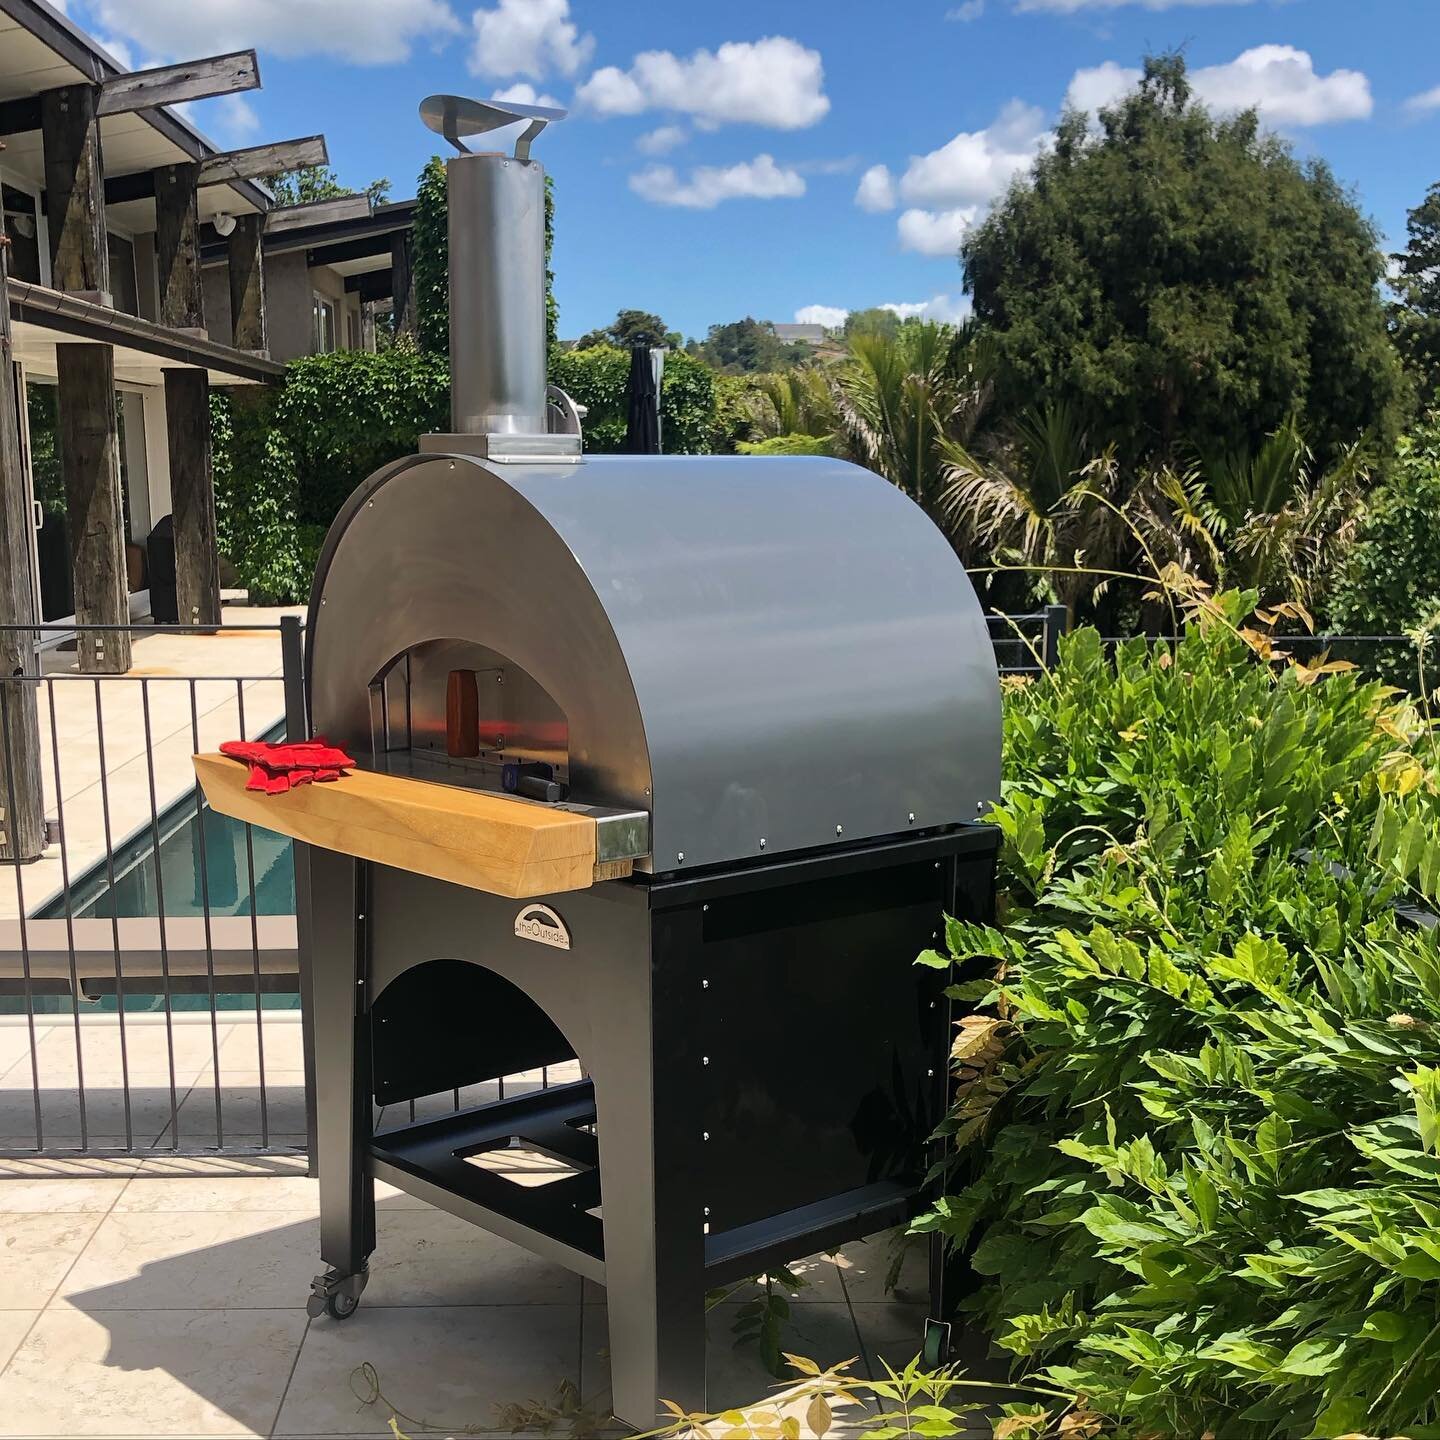 Another very happy and excited customer after we delivered their bespoke NZ made and designed Woodfired Oven to them today in Sandspit. Powder coated in Grey Friars for the oven and Mannex Black for the base. #pizza #notjustpizza #pizzaoven #woodfire